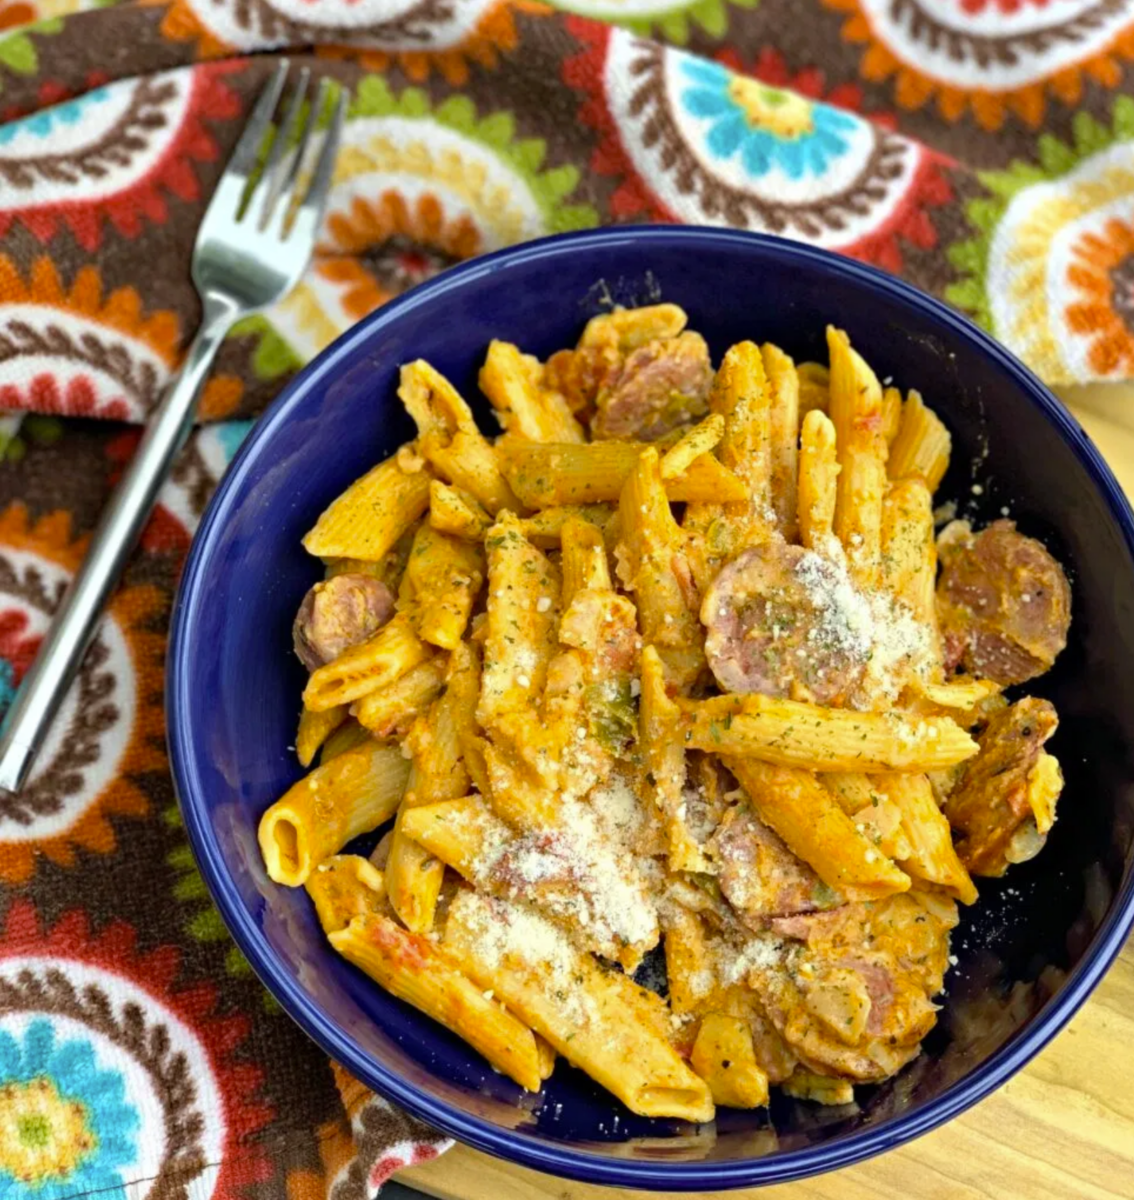 quarantine recipes | Stuck at Home Recipes by popular Houston lifestyle blog, Haute and Humid: image of Instant Pot Cajun chicken pasta.